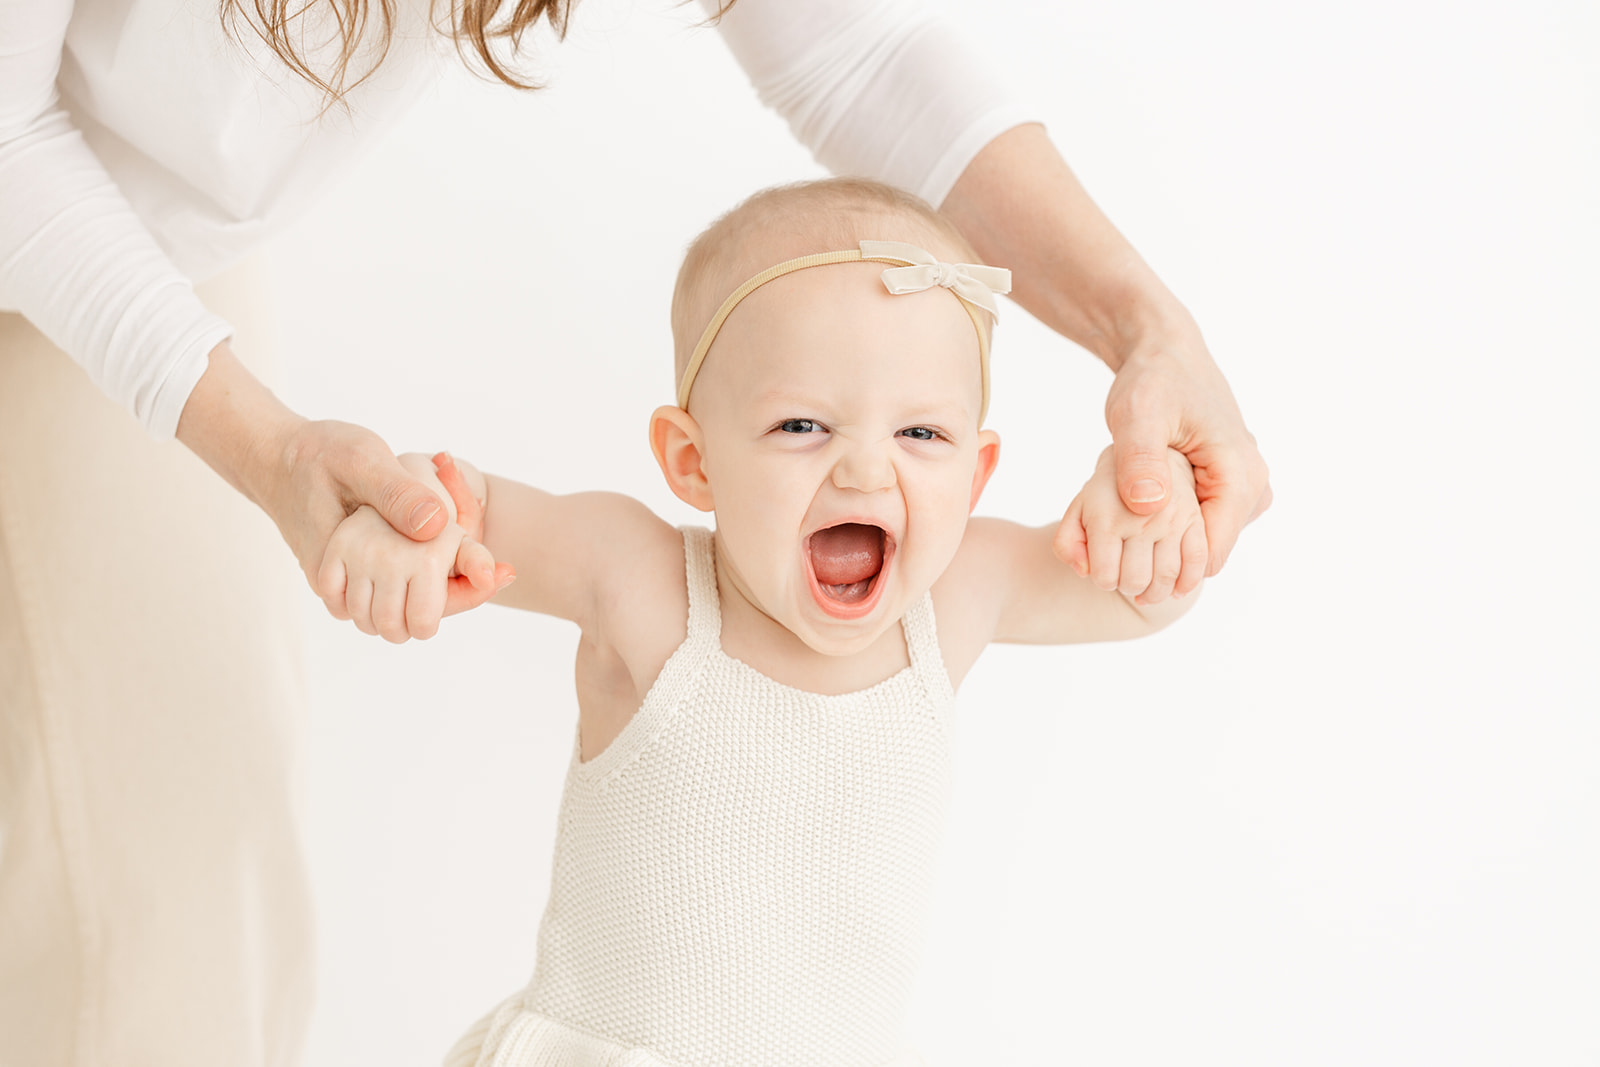 A mother helps her laughing infant daughter walk through a studio in a white dress